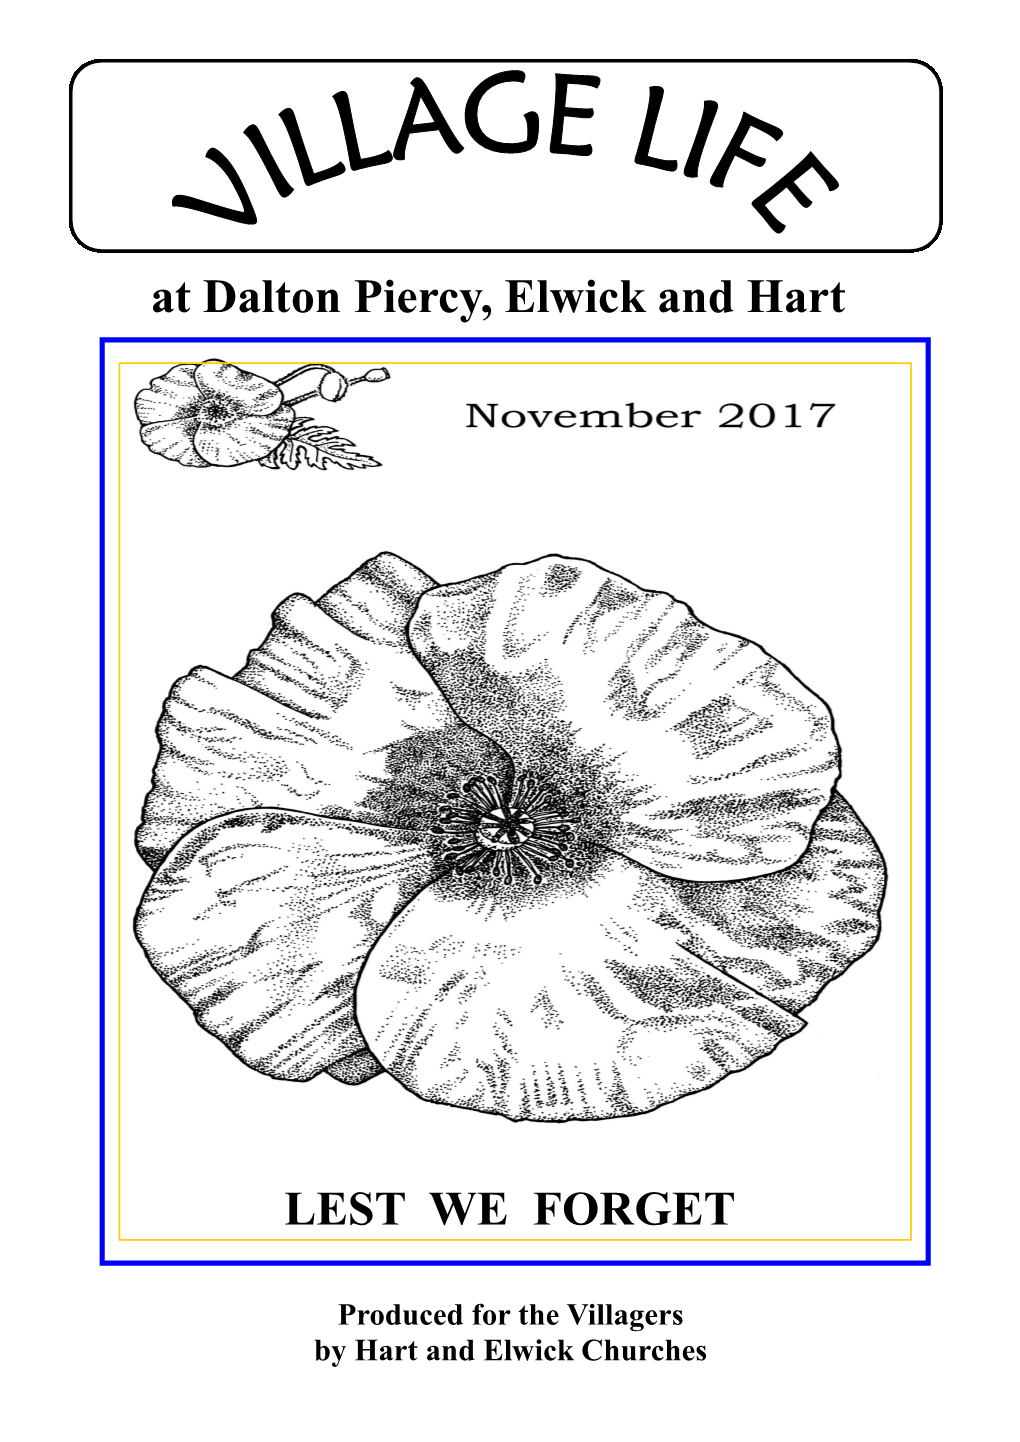 At Dalton Piercy, Elwick and Hart LEST WE FORGET